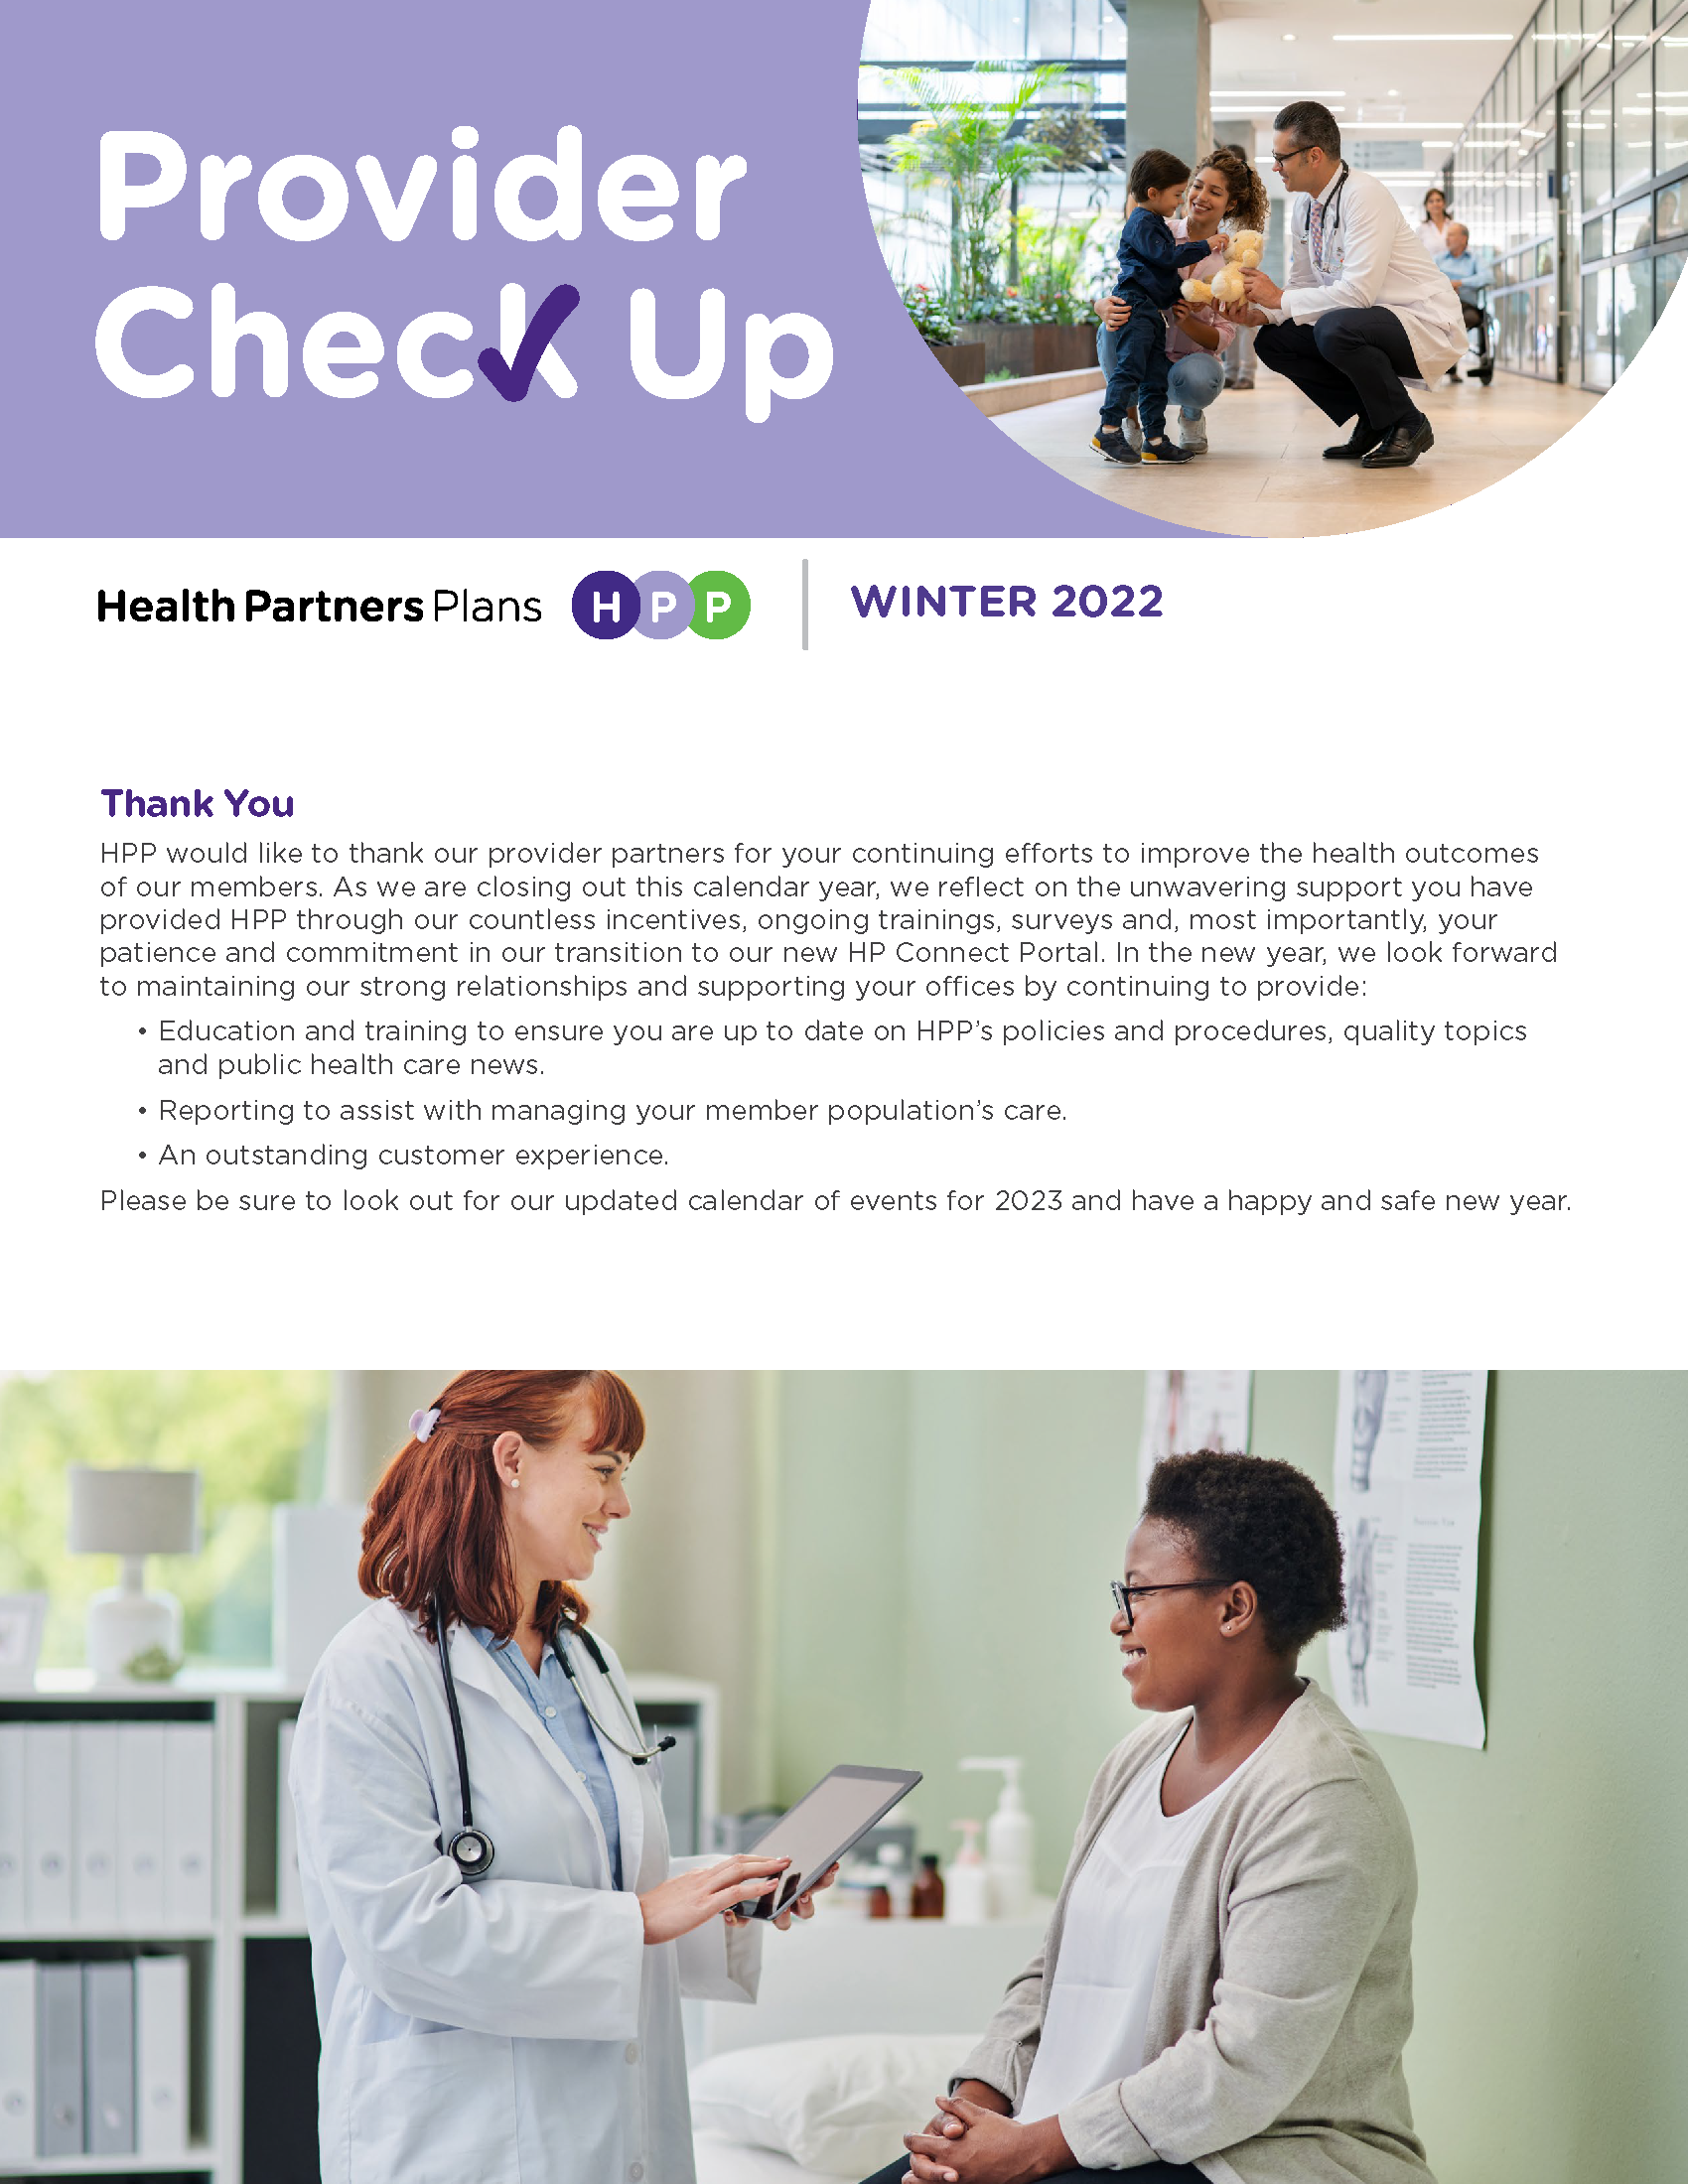 Fall Issue of Provider Newsletter